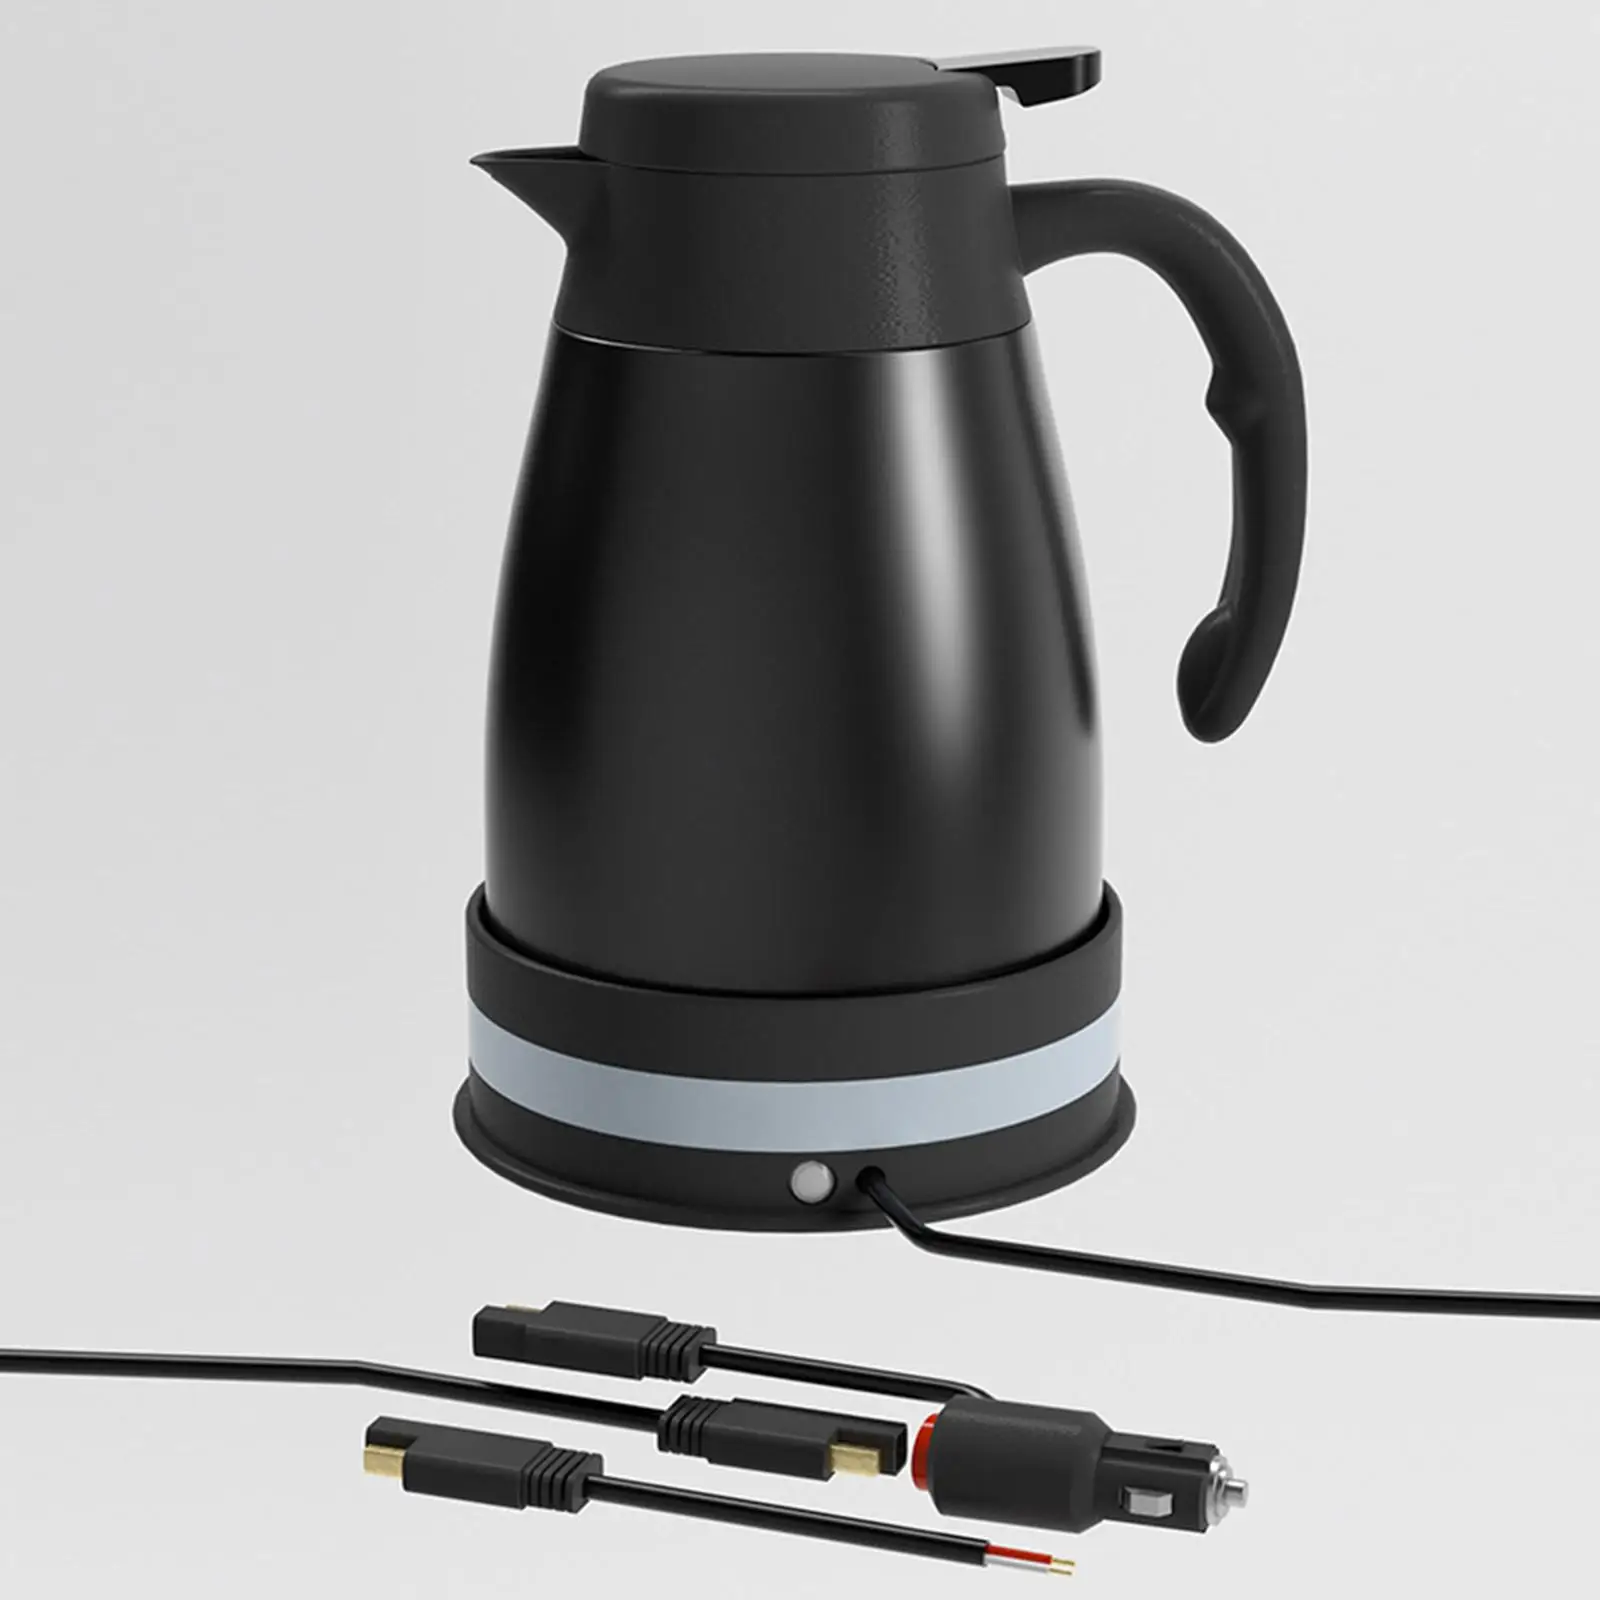 Car Electric Kettle Pot Hot Water Kettle DC 24V Heating Kettle for Road Trip